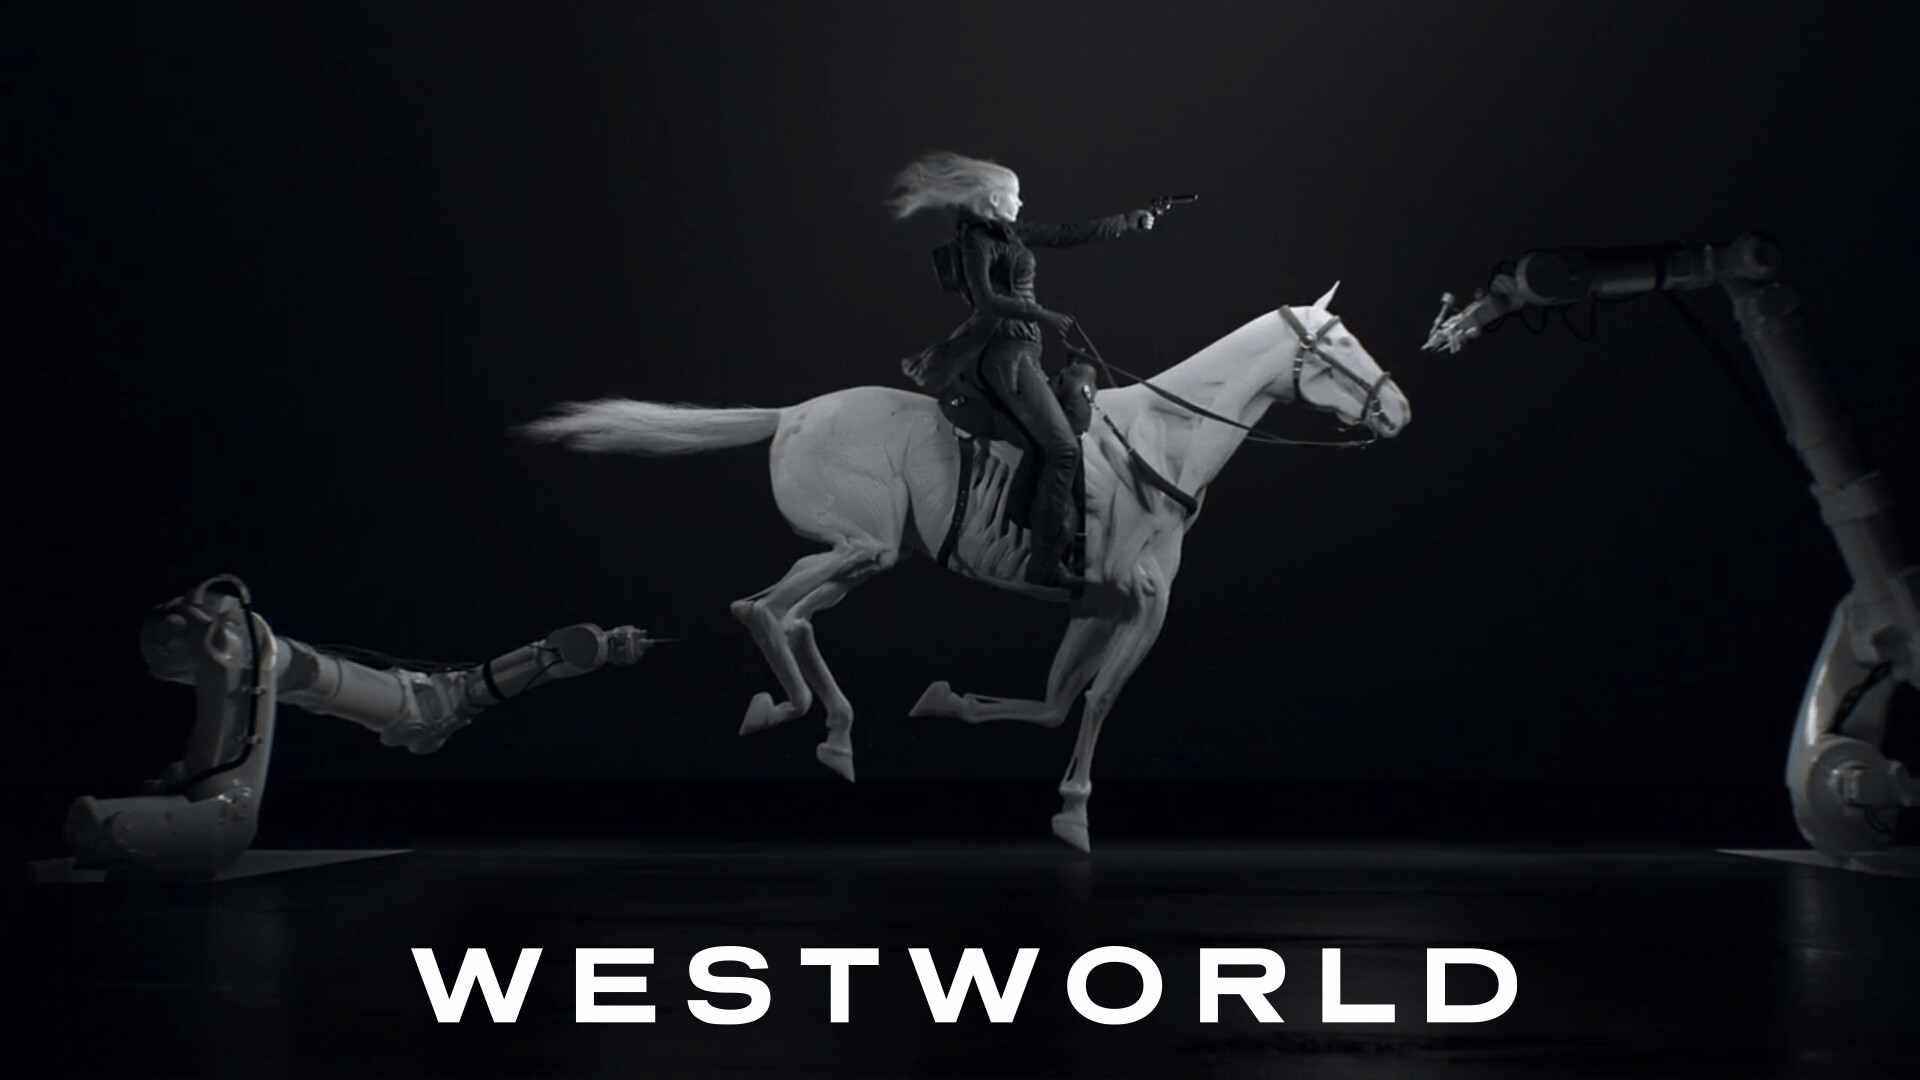 Westworld: A sci-fi drama set in an Old West theme park where guests interact with automatons in scenarios that are developed, overseen, and scripted by the park's creative, security, and quality assurance departments. 1920x1080 Full HD Wallpaper.